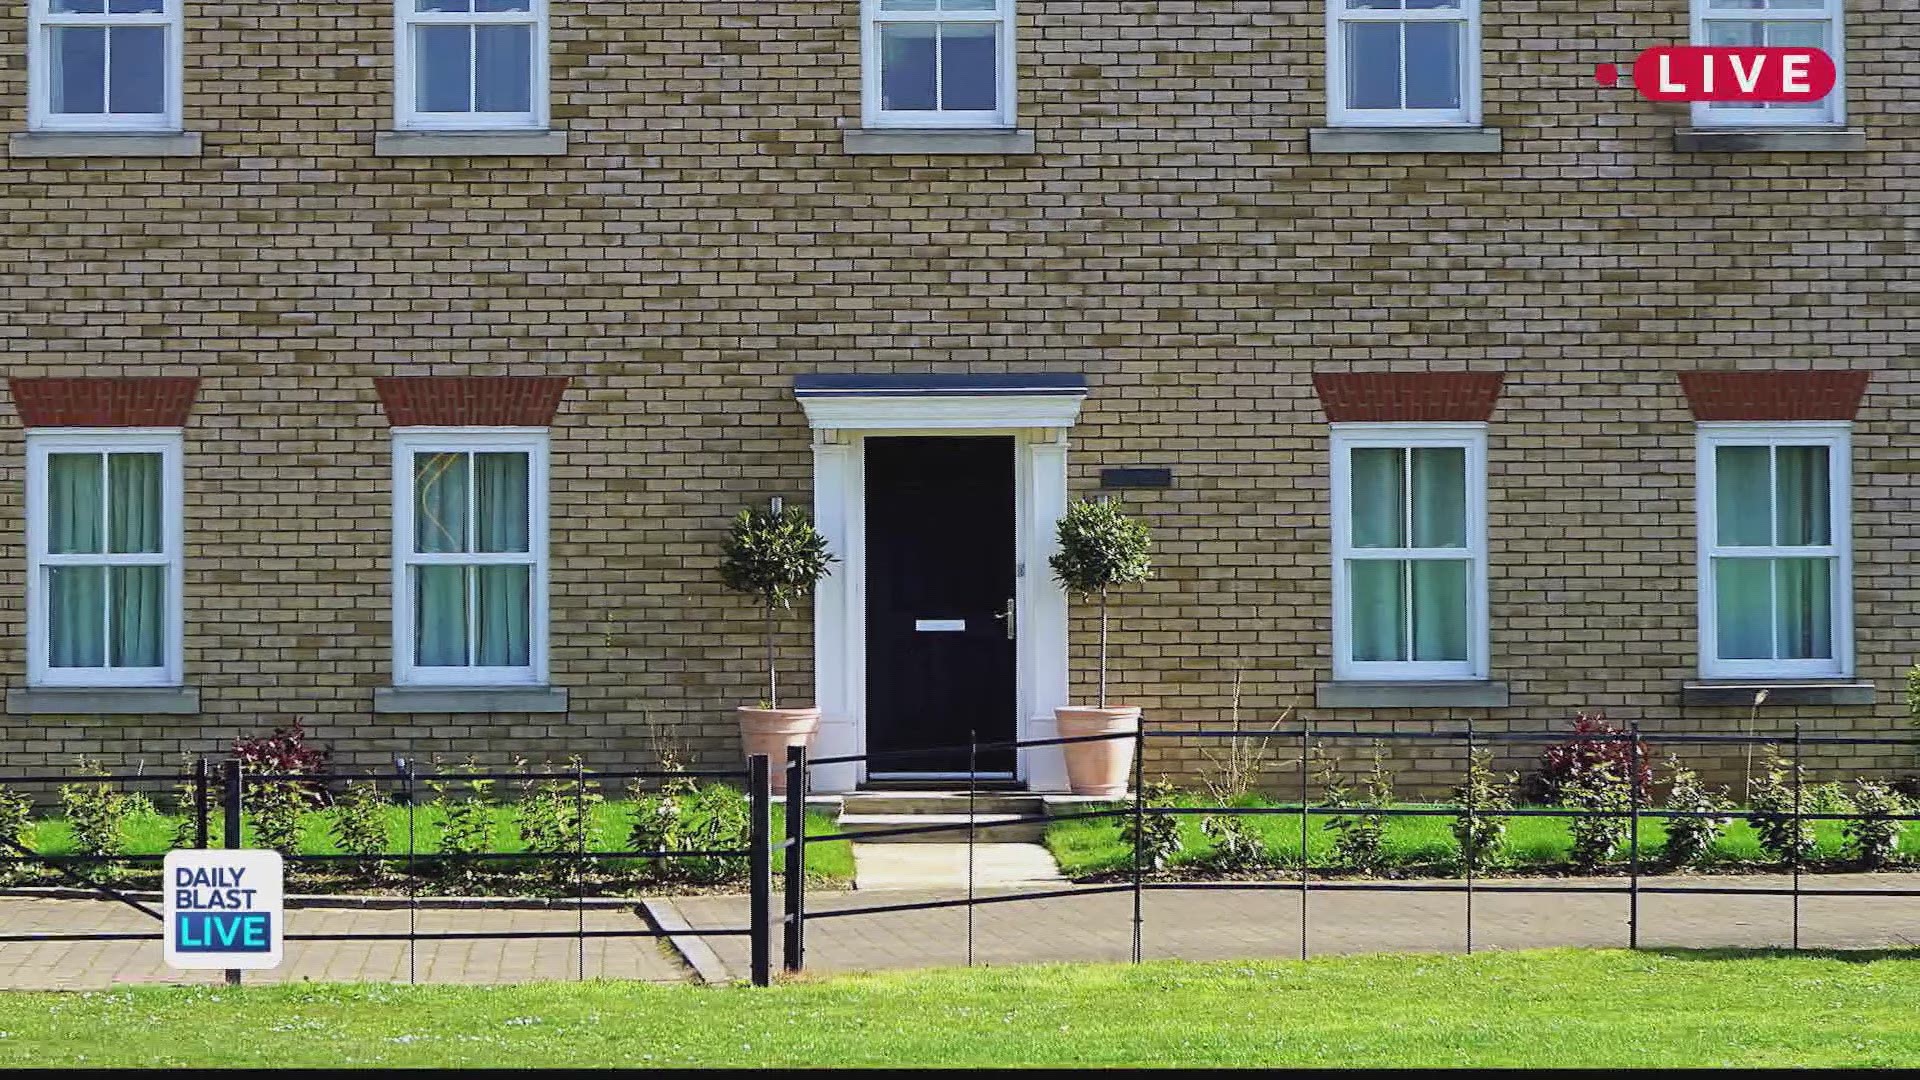 Did you know your front door could add thousands to your home value? From re-potting flowers to replacing outdated kitchen fixtures, Daily Blast LIVE is bringing all the same details that add major value to your property. What do you think your best home